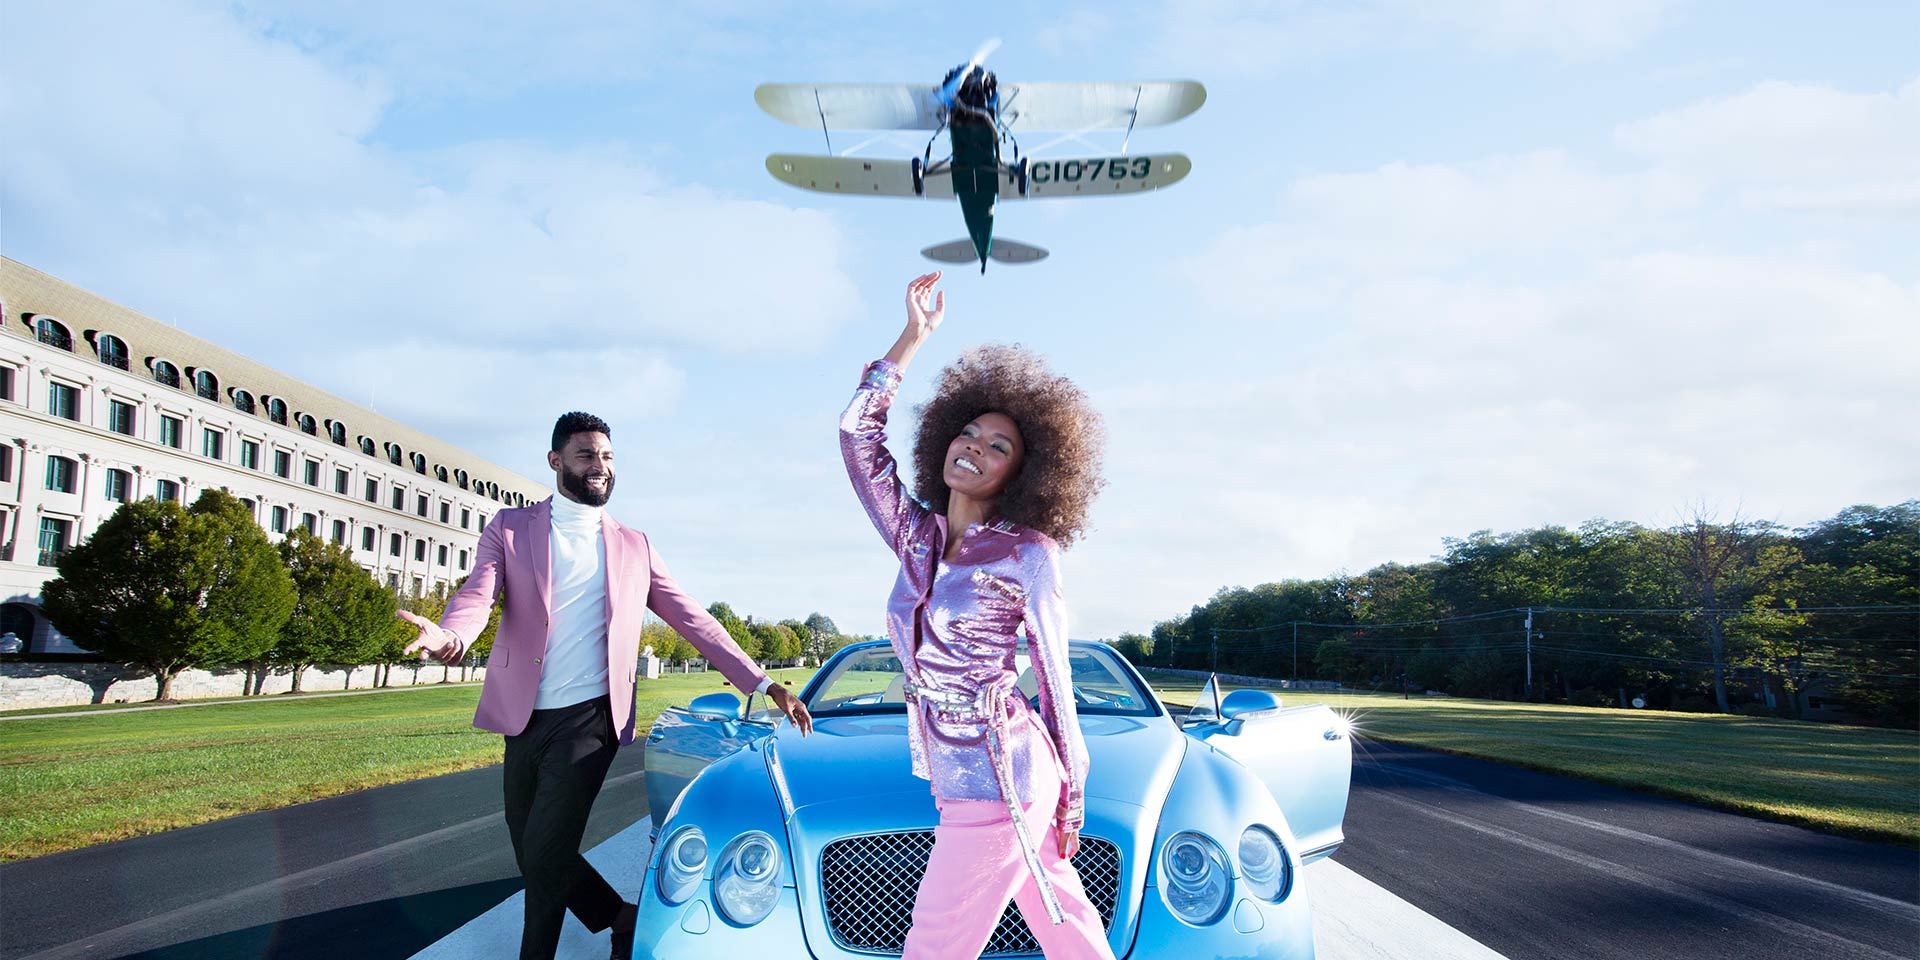 A couple dressed in pink attire walking near a blue car with a airplane flying above them.